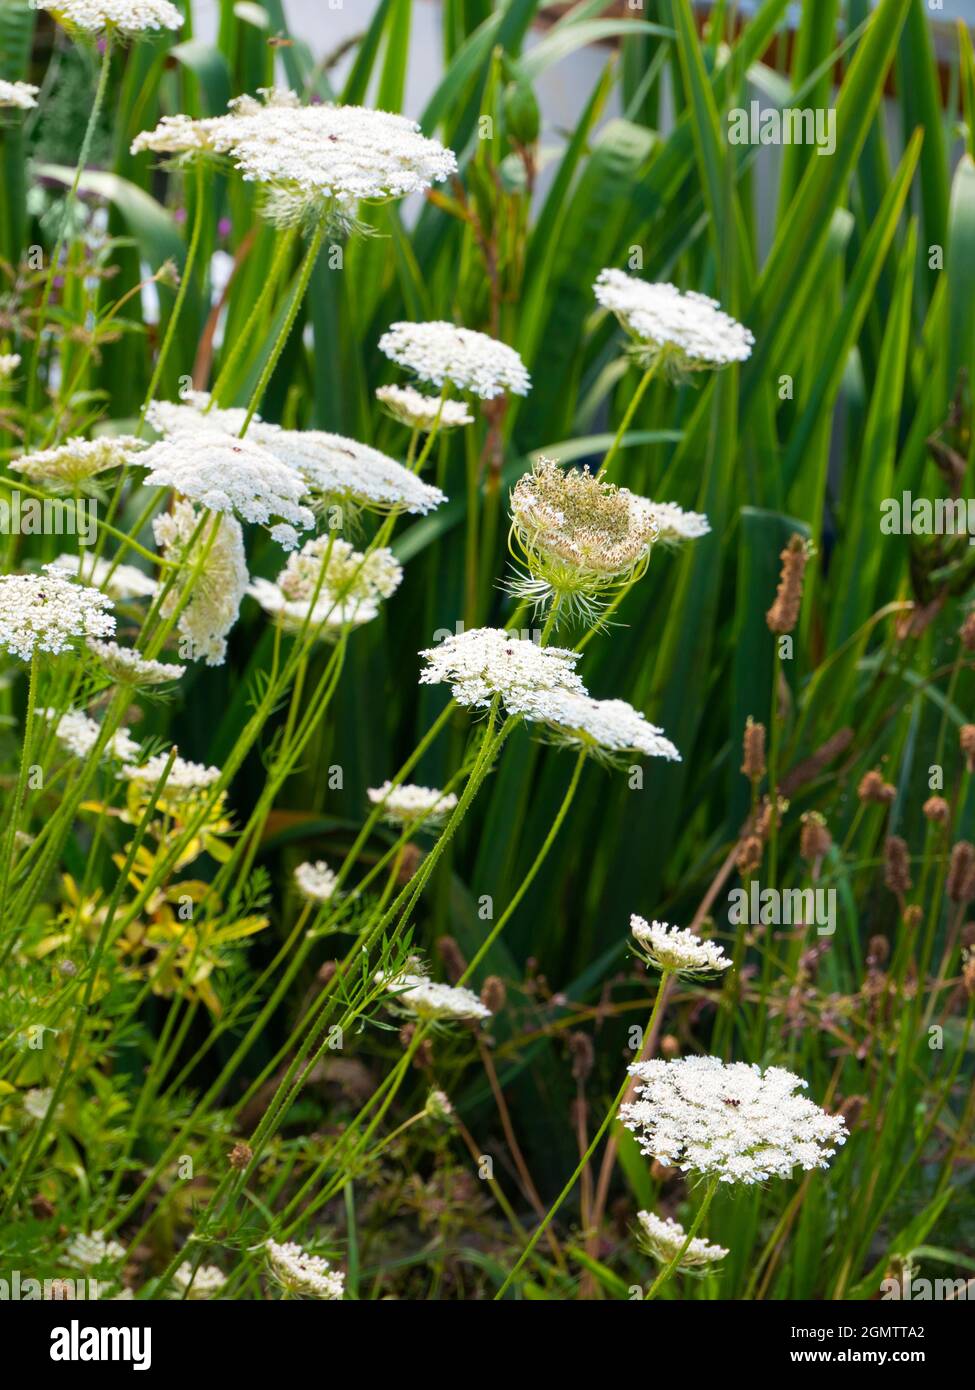 River Thames, Oxfordshire, England - 13 July 2019      Anthriscus sylvestris, known as cow parsley is a herbaceous biennial or short-lived perennial p Stock Photo